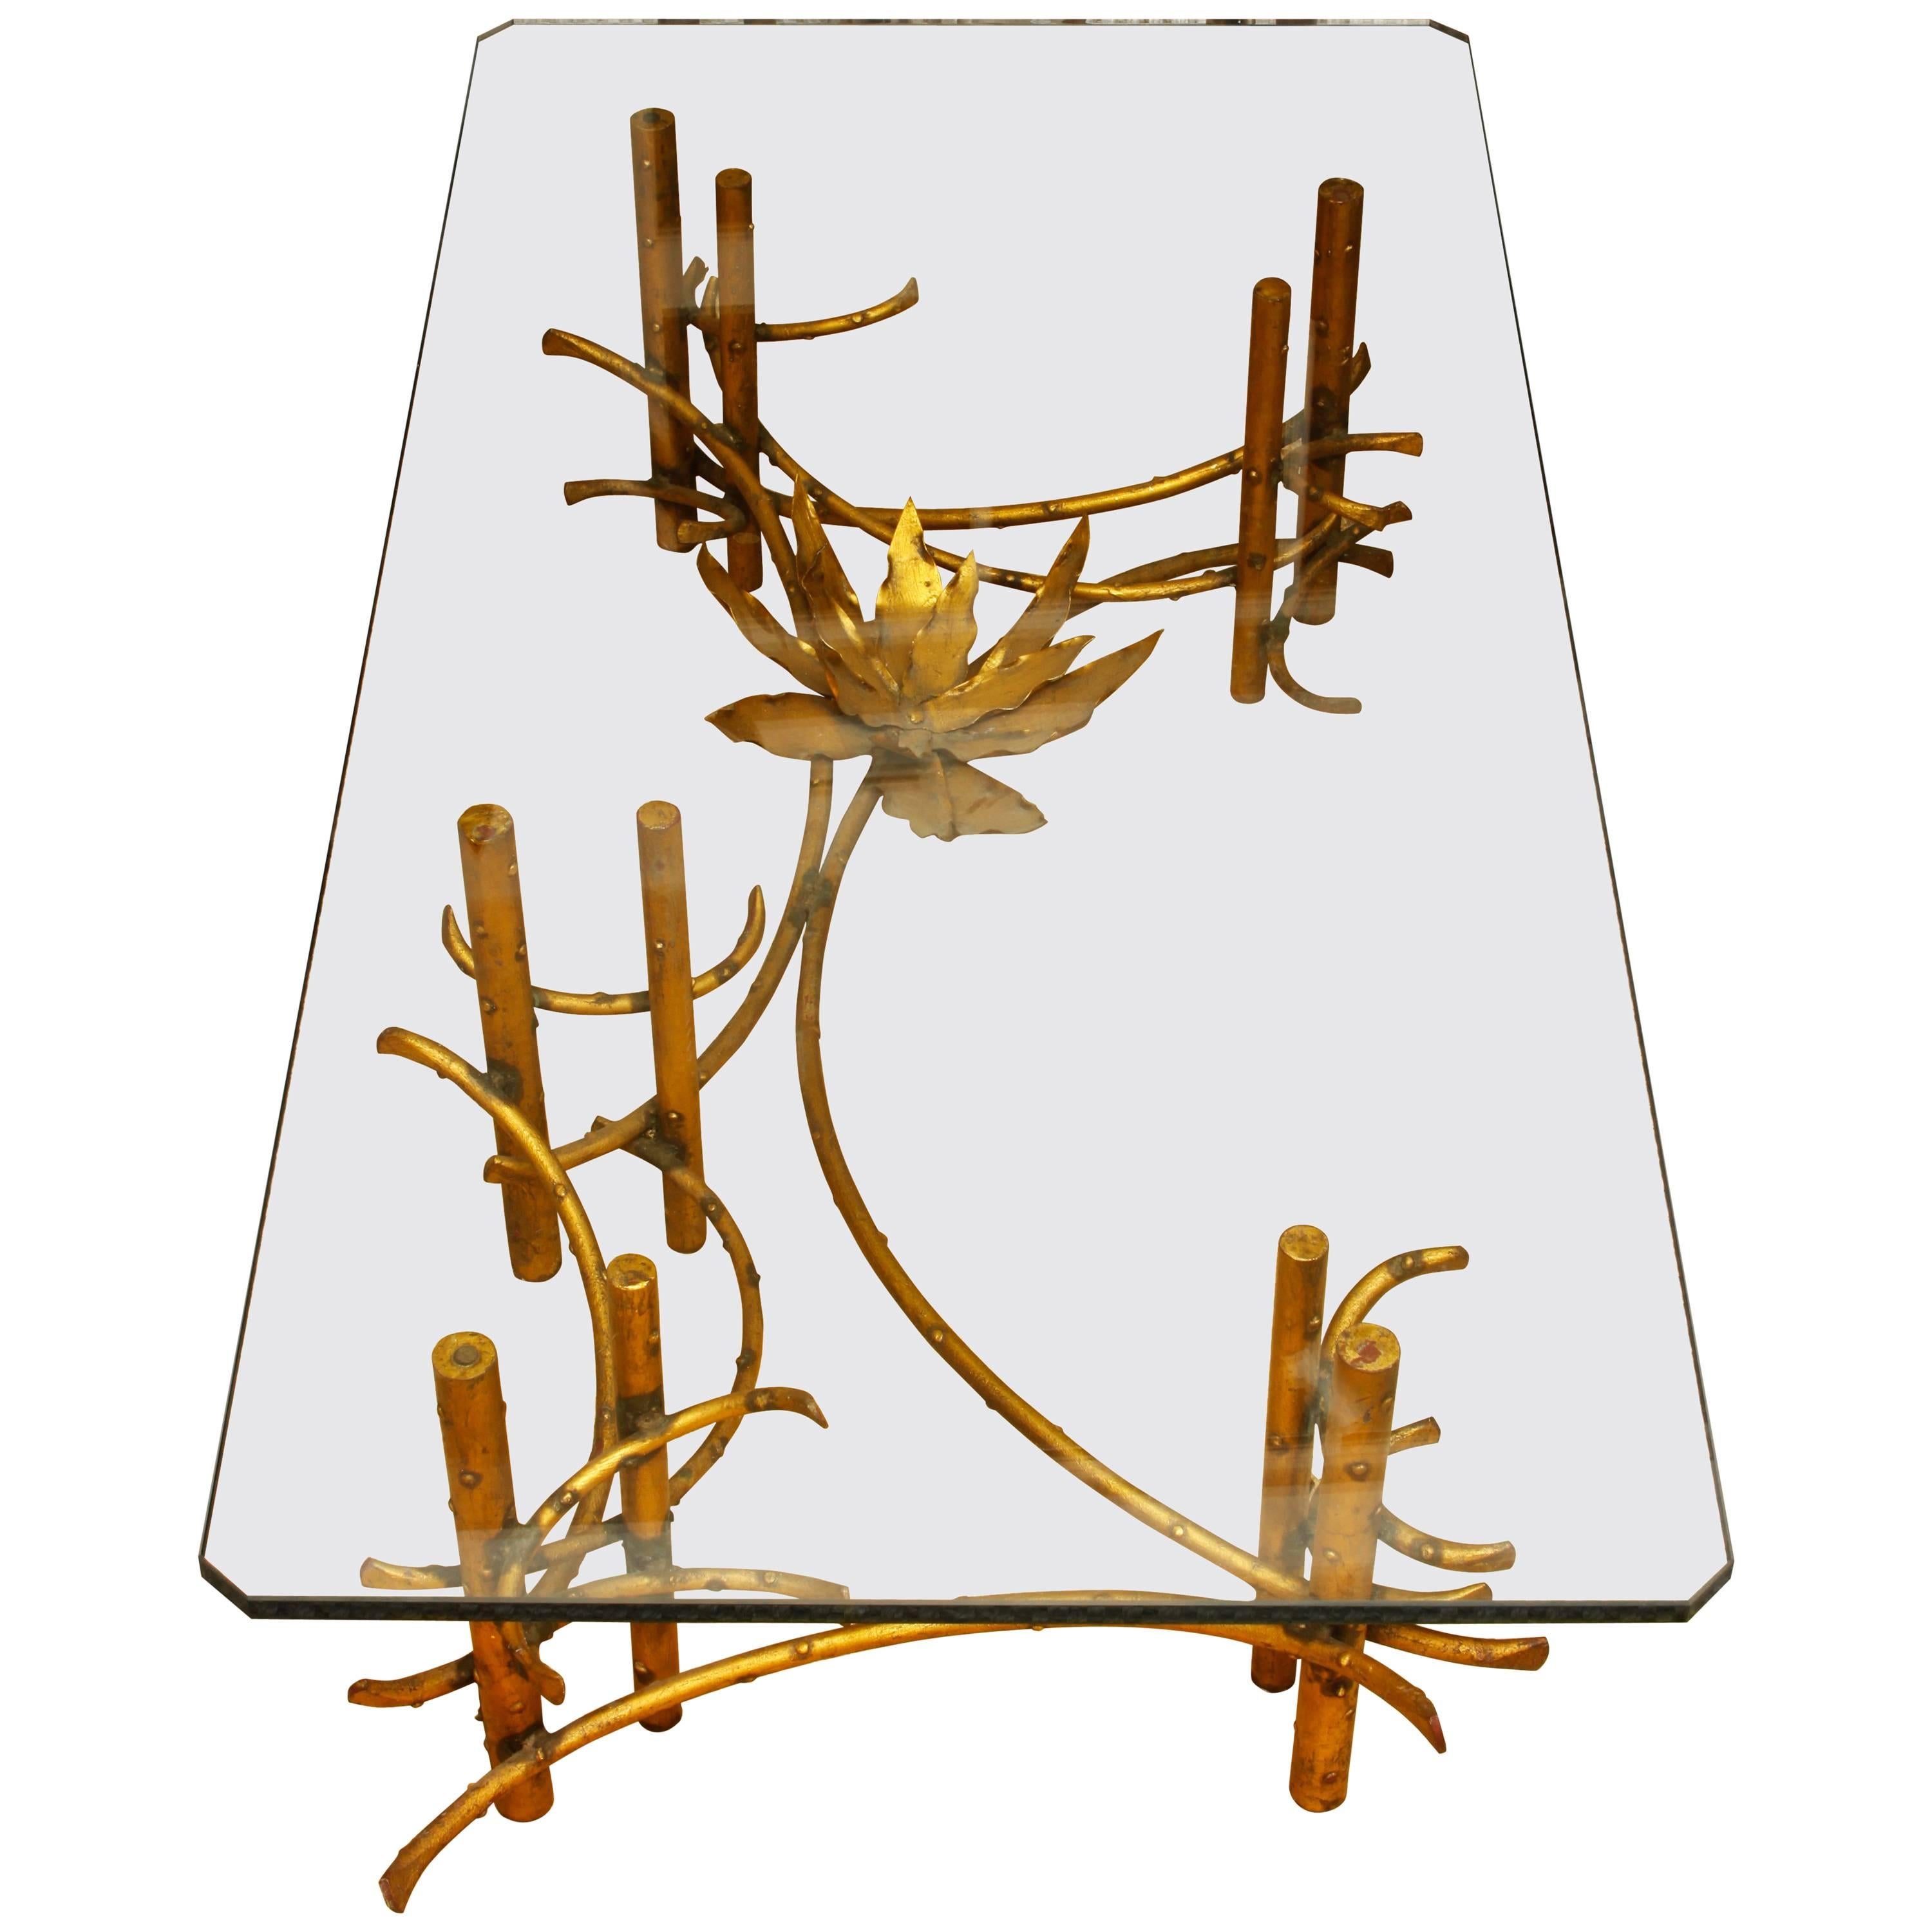 A fantastic table attributed to the American sculptor Silas Seandel. The base is a wonderful asymmetrical design with a large leafy flower on one end, supporting a thick glass top. A work of art in itself, the table has both form and function.